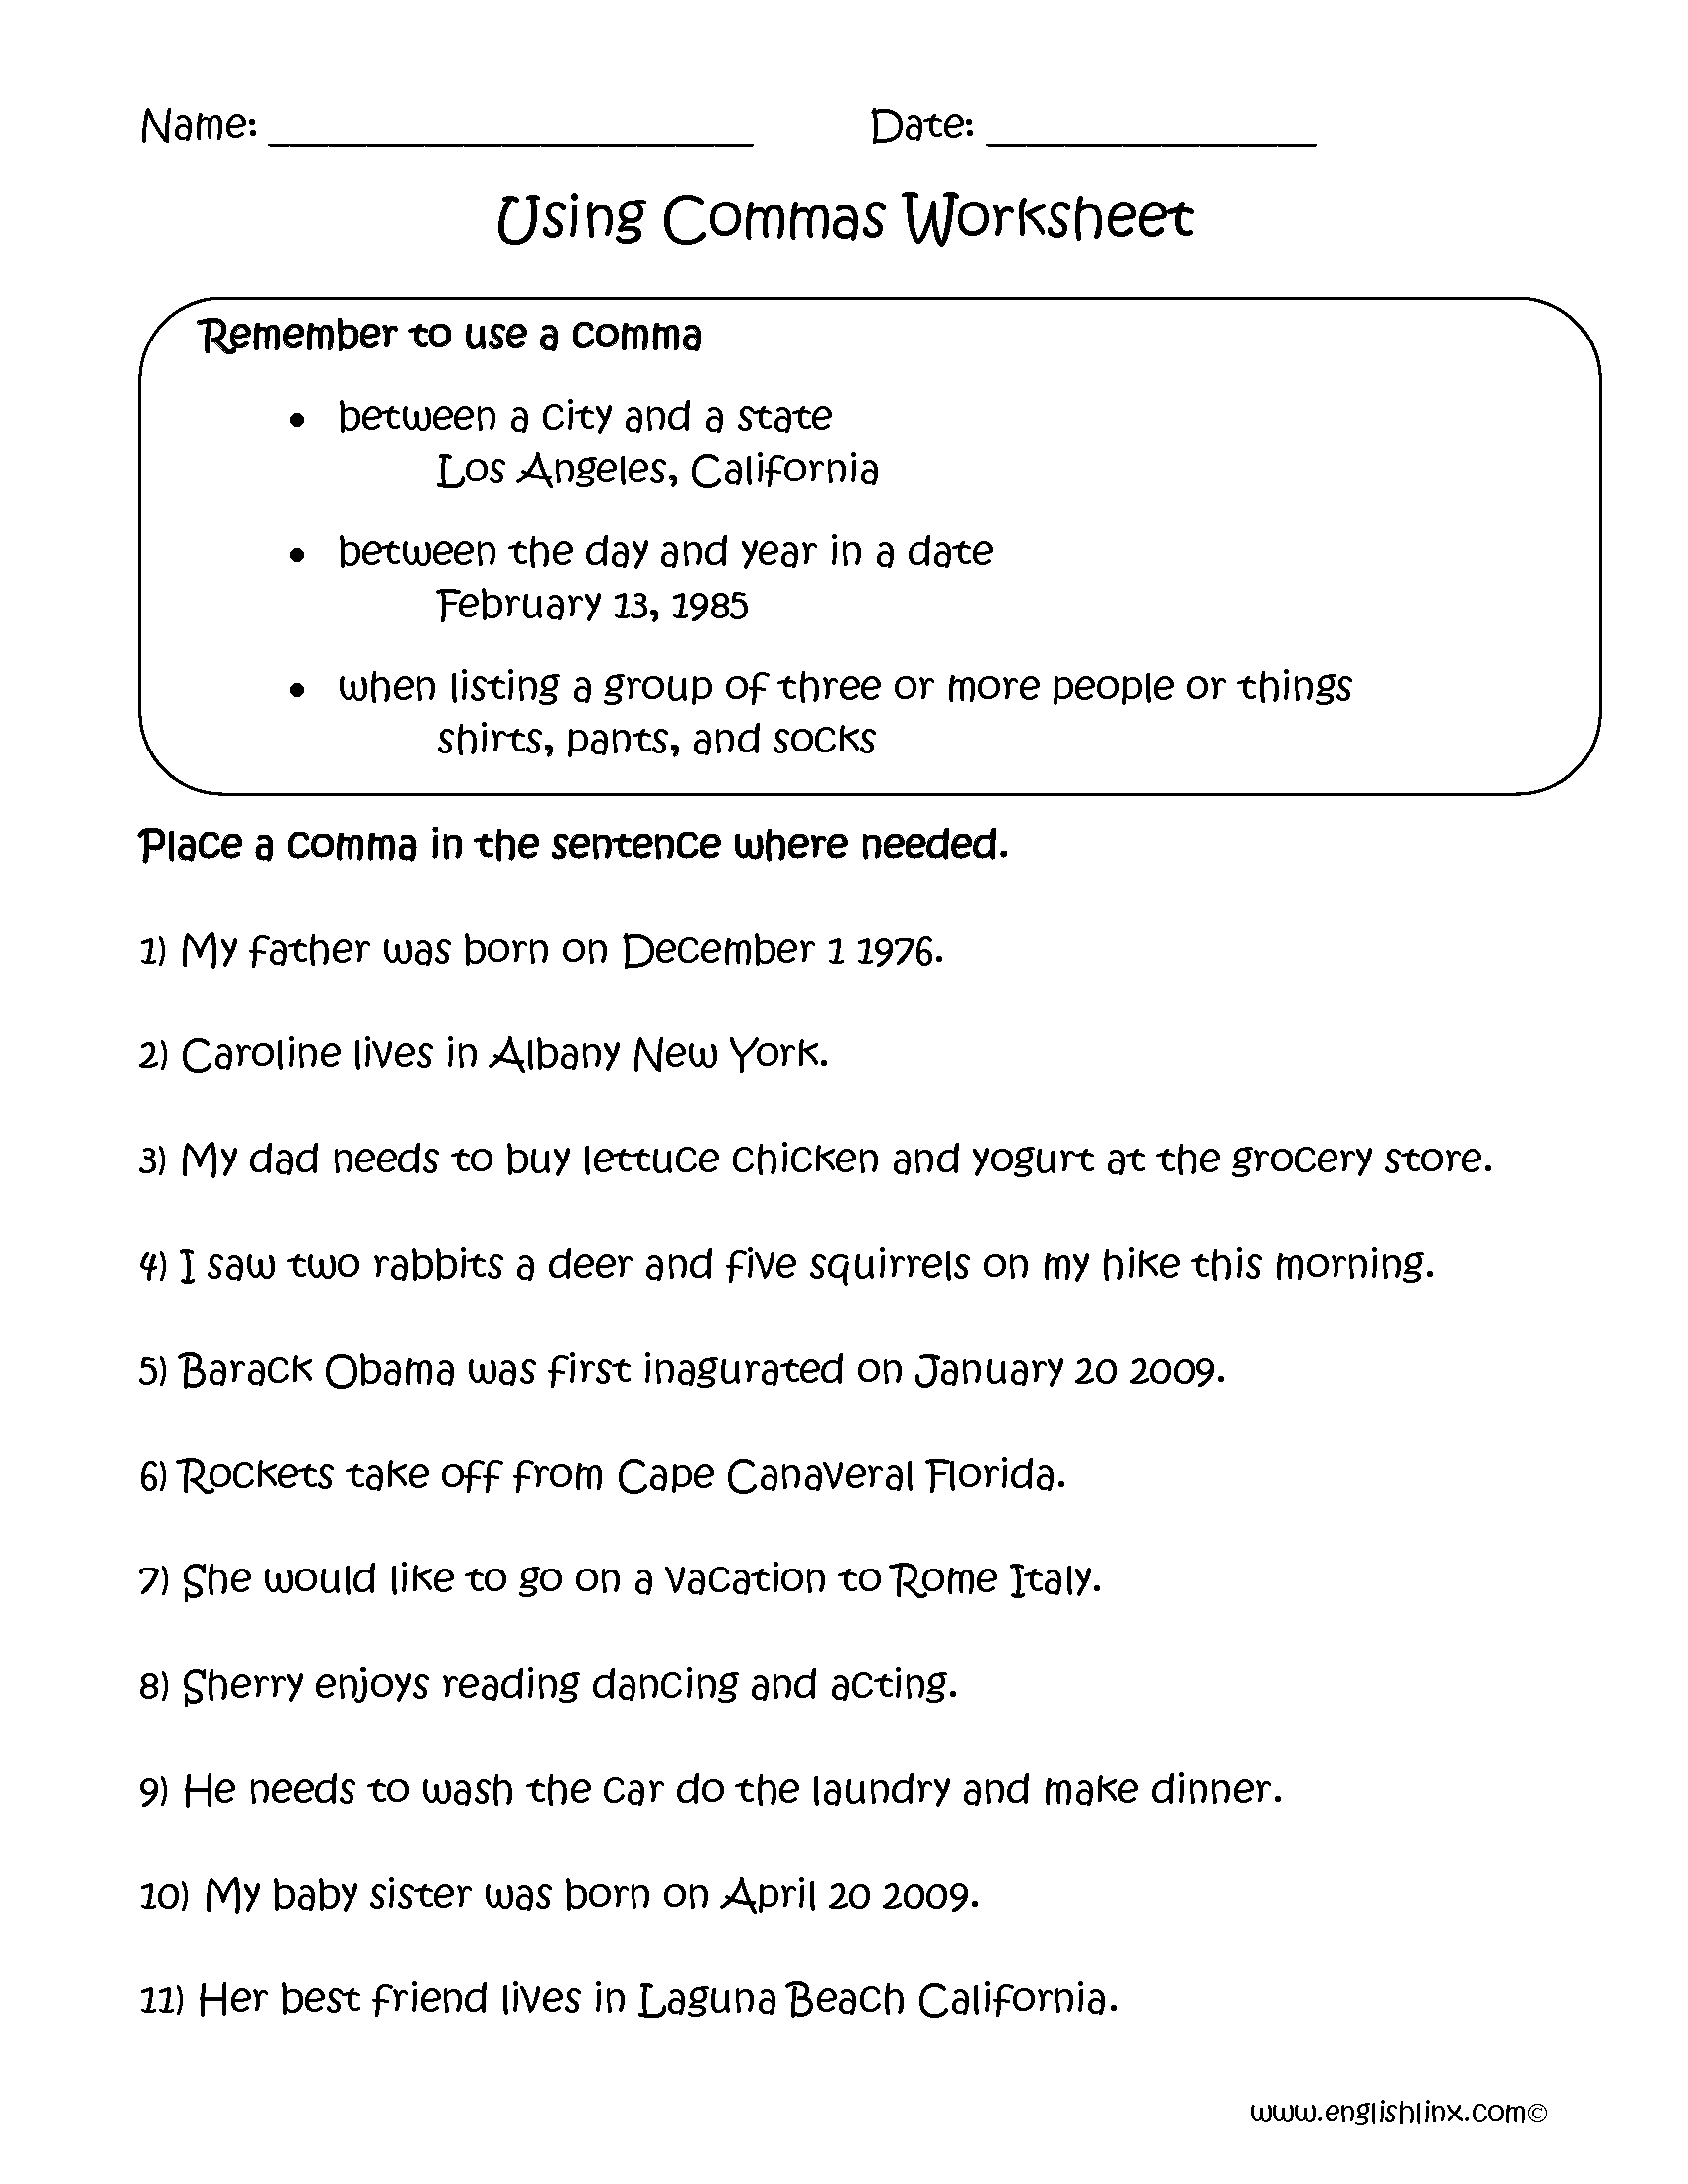 comma practice worksheet db excelcom